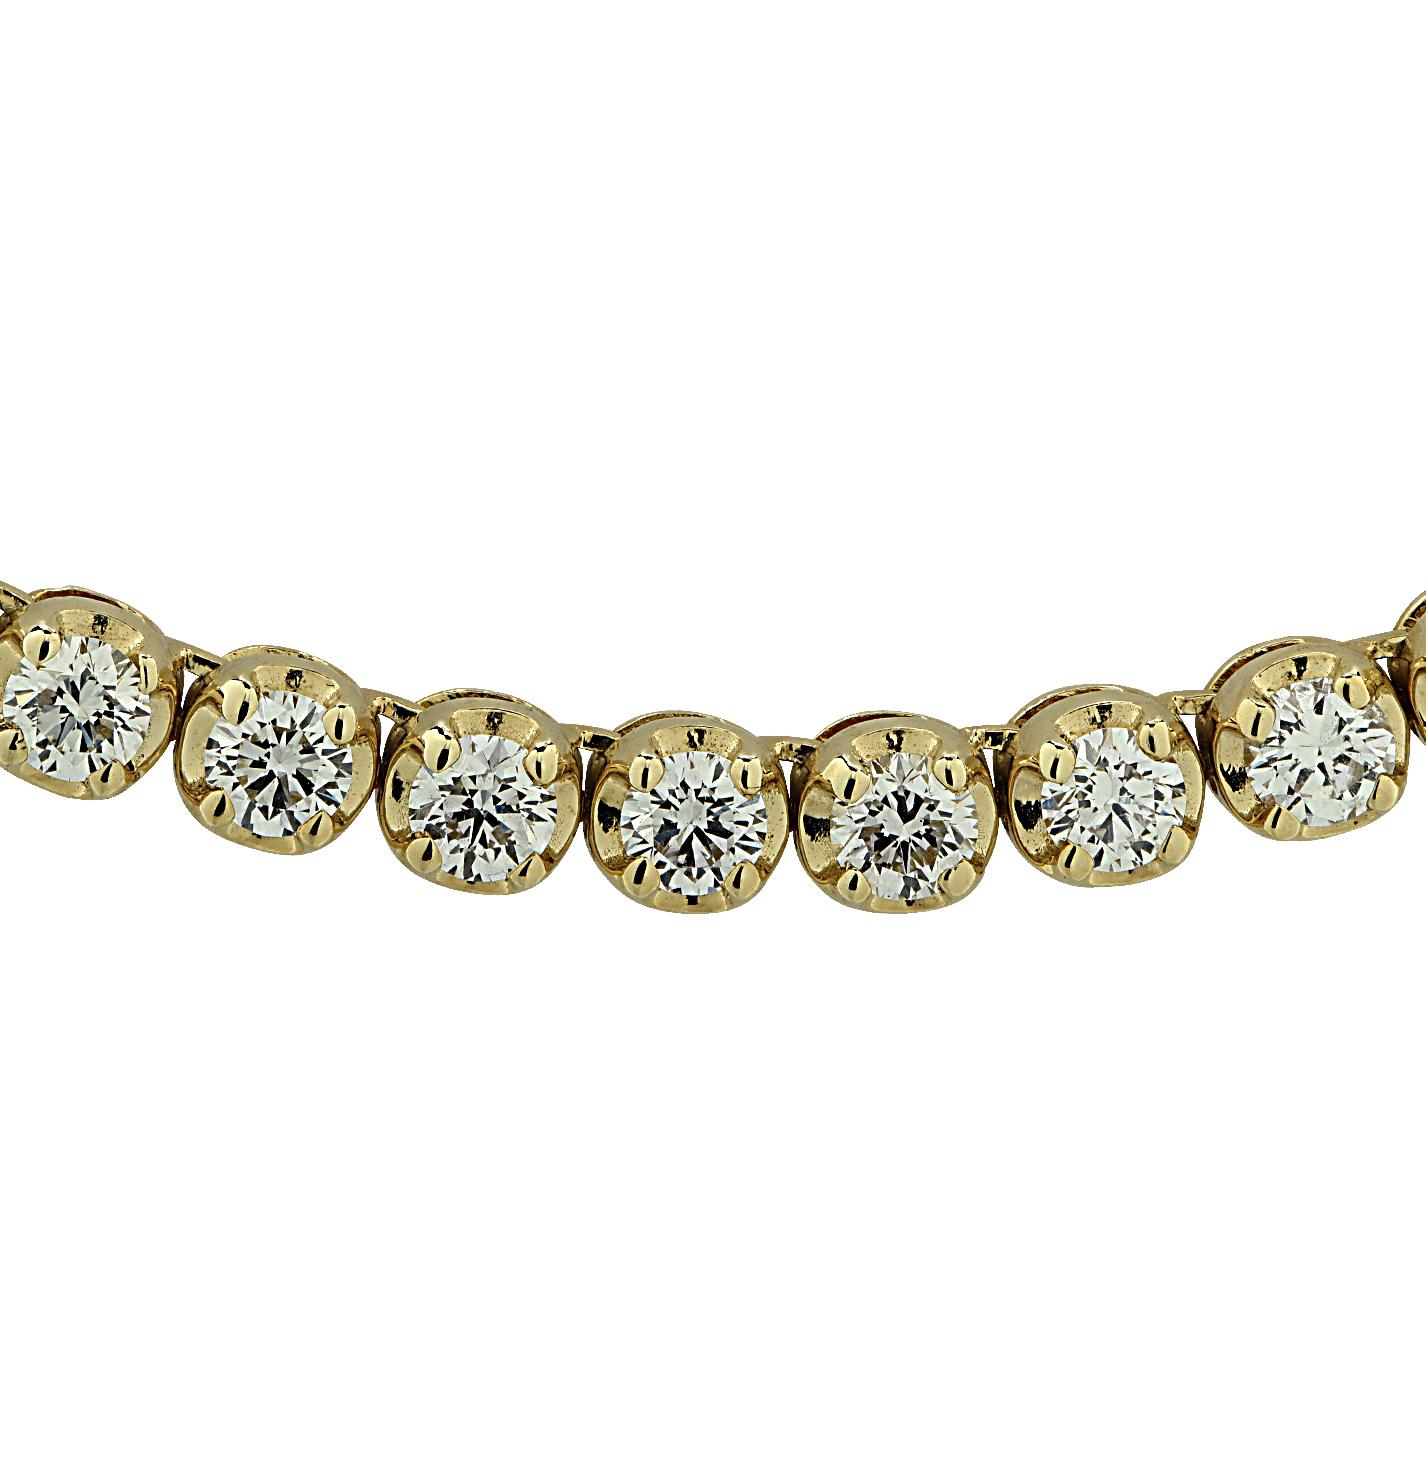 Exquisite Vivid Diamonds Straight Line diamond tennis necklace crafted in Yellow Gold, showcasing 93 round brilliant cut diamonds weighing 11.17 carats total, E-F color, VS clarity. Each diamond was carefully selected, perfectly matched and set in a